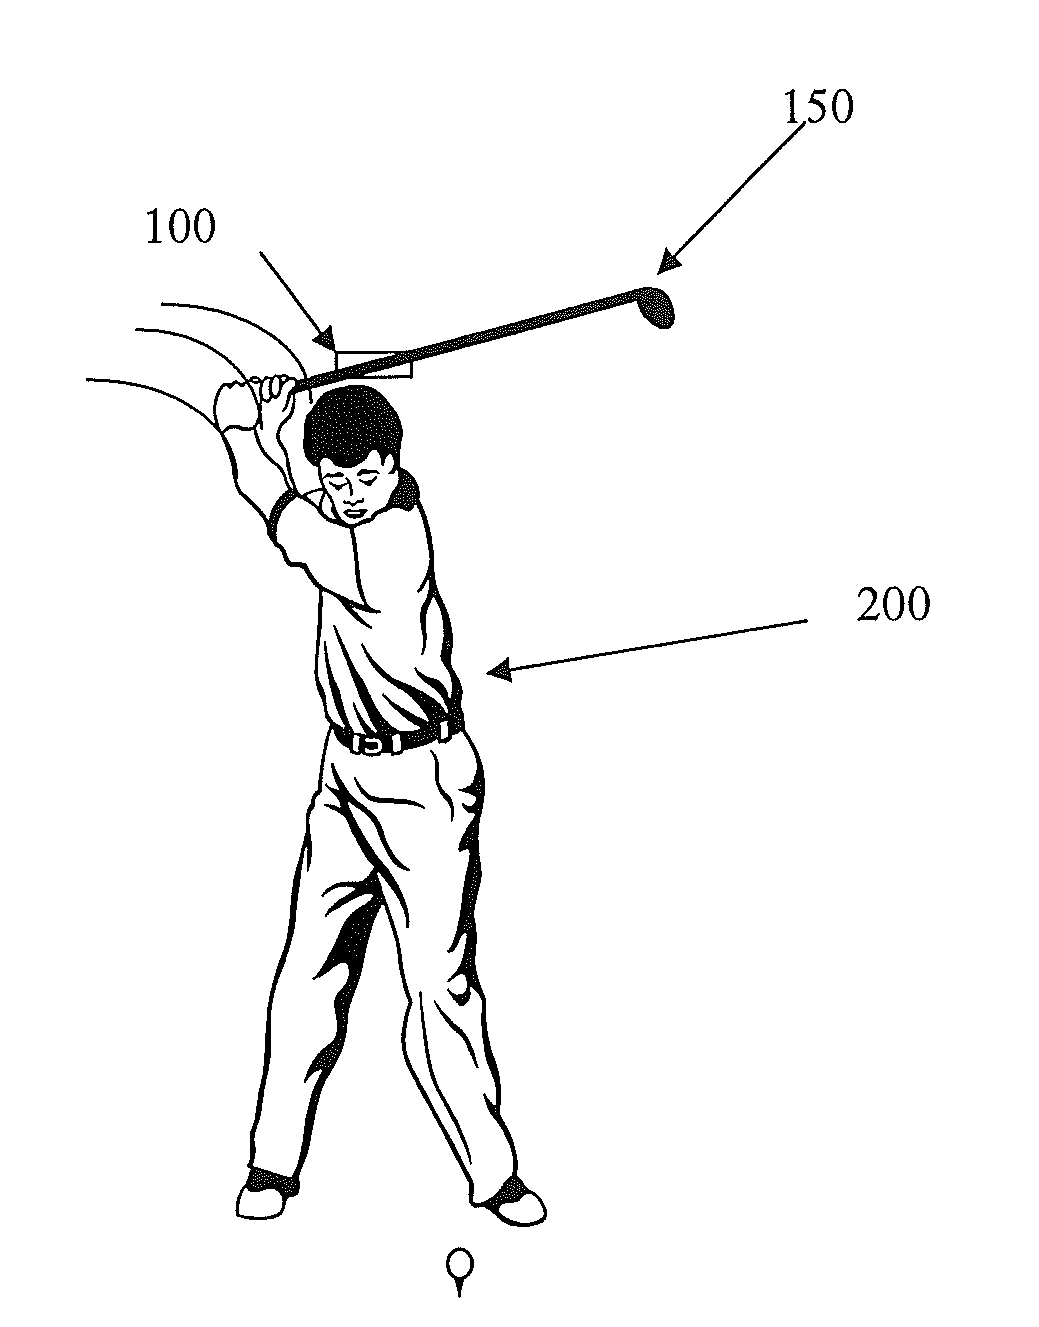 Auditory feedback for golfers' face closure rate